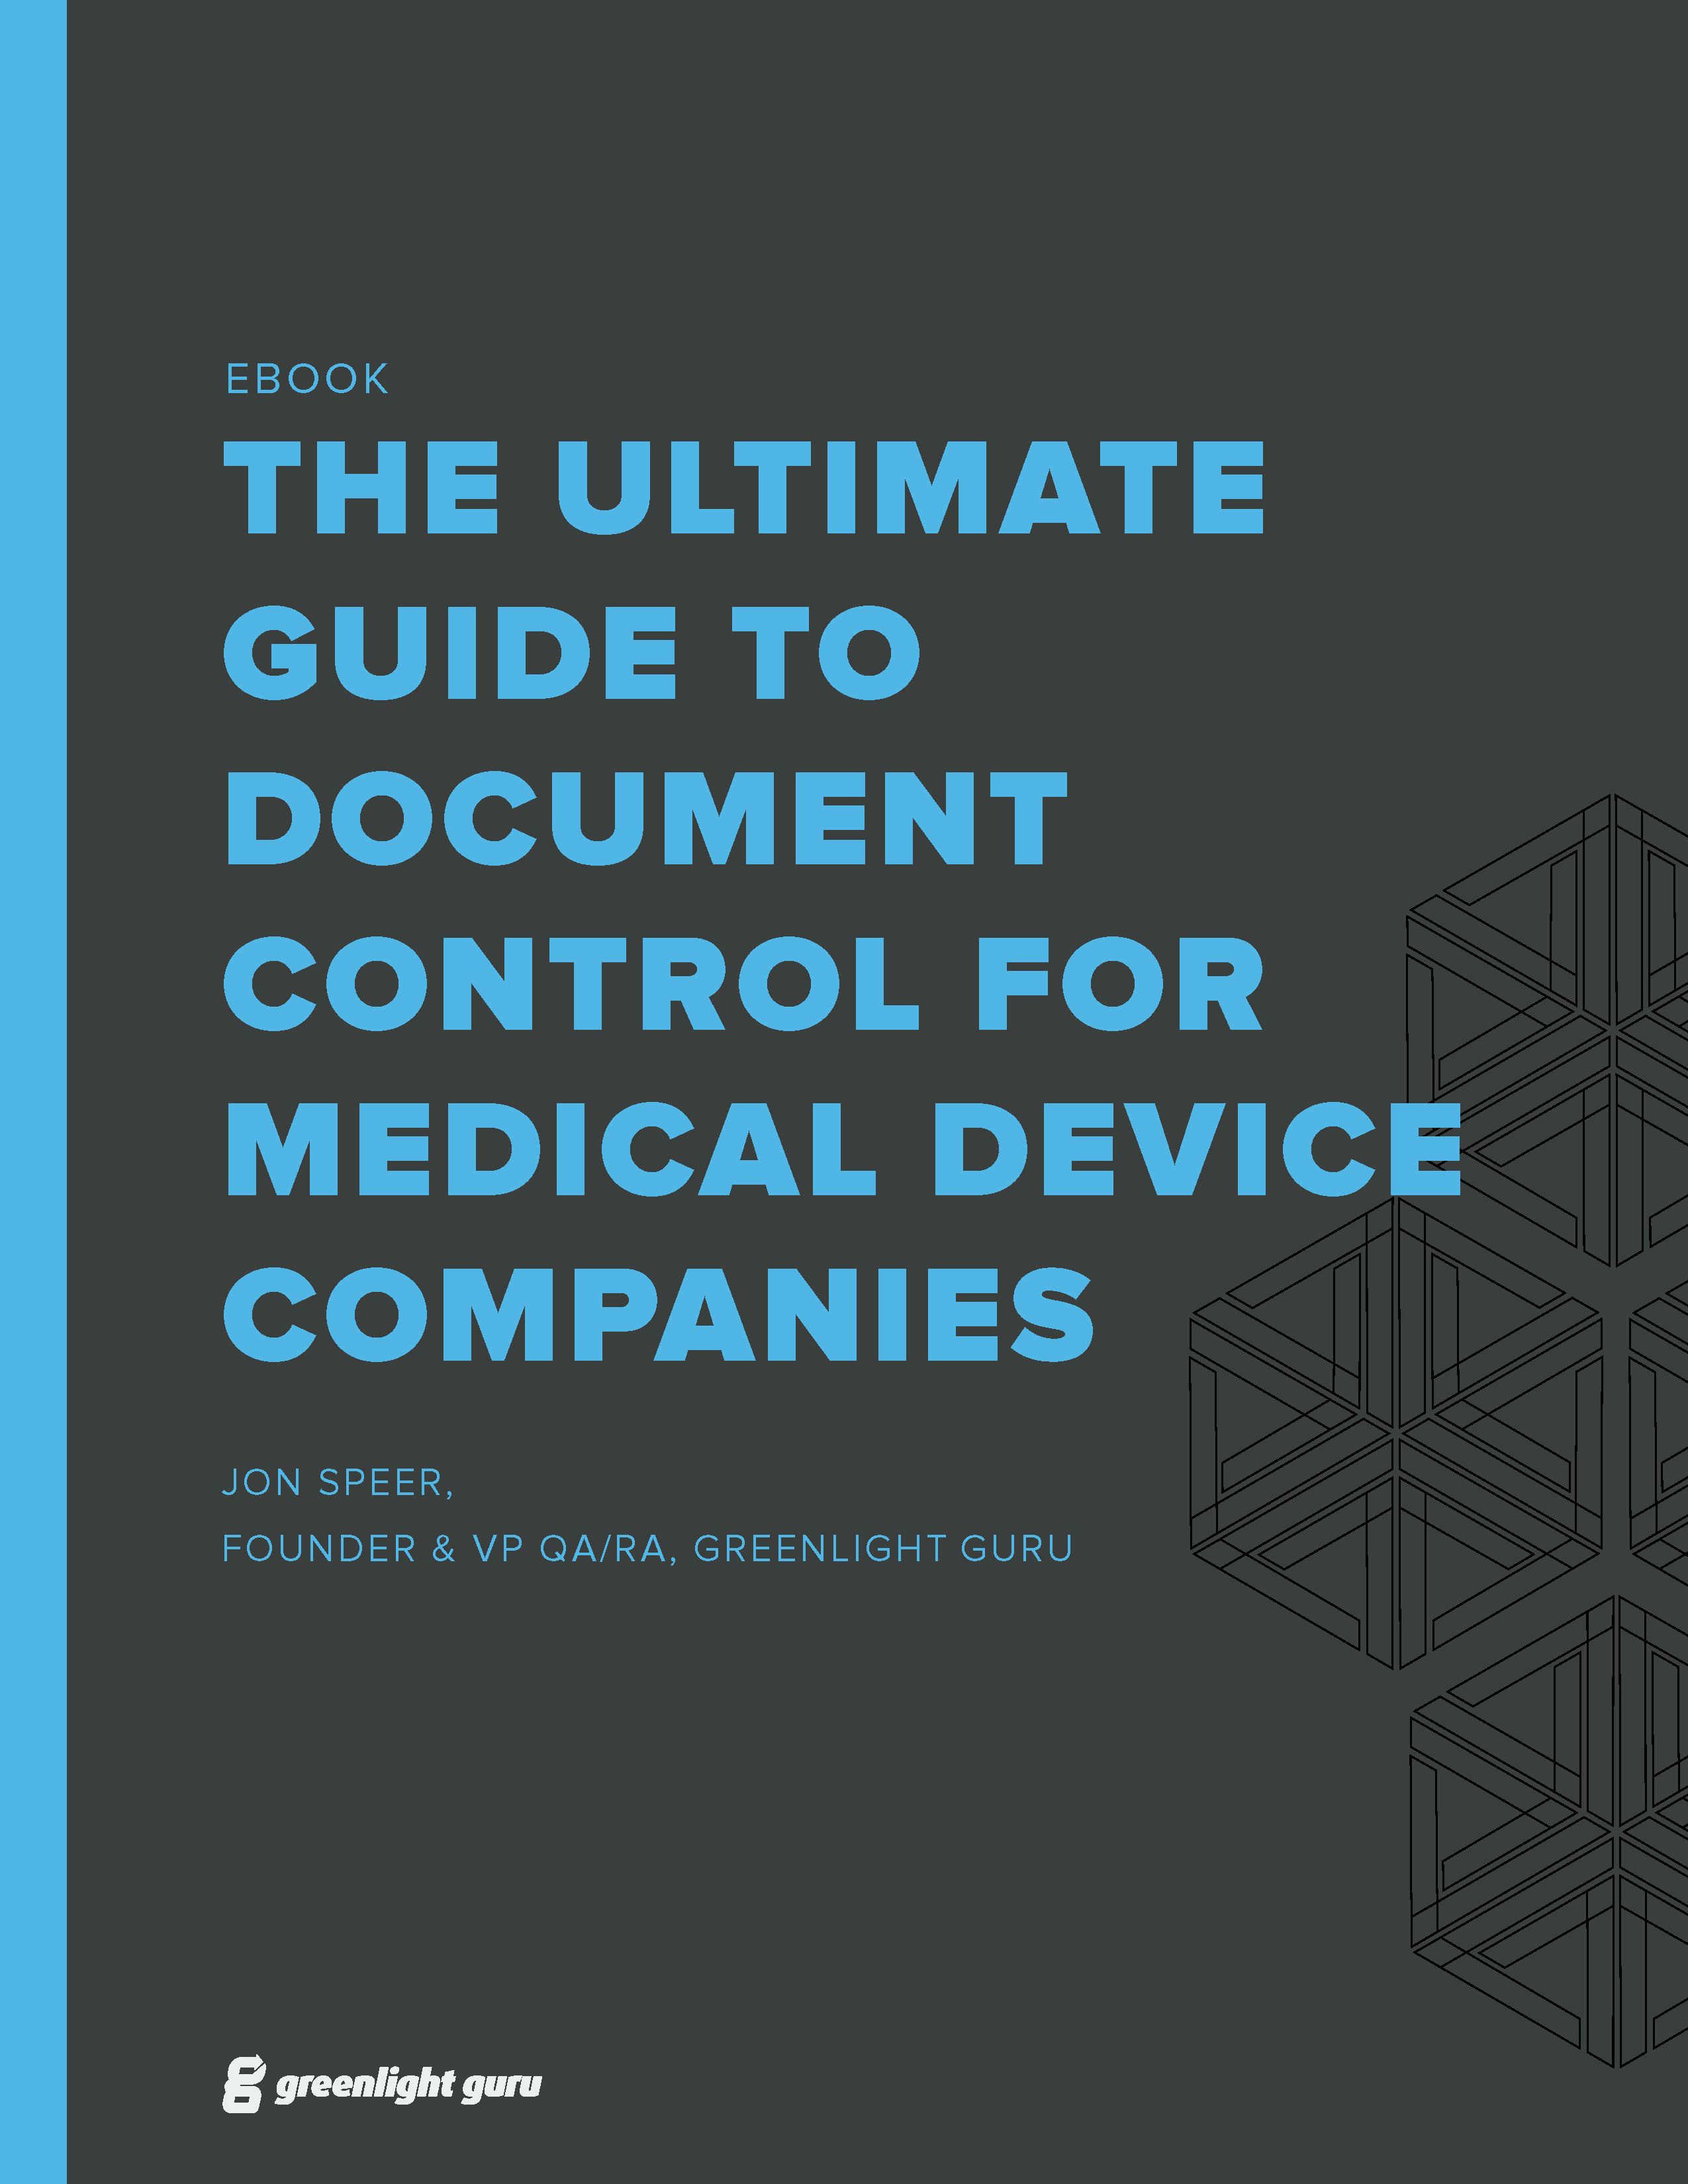 (cover) Ultimate Guide to Document Control for Medical Device Companies